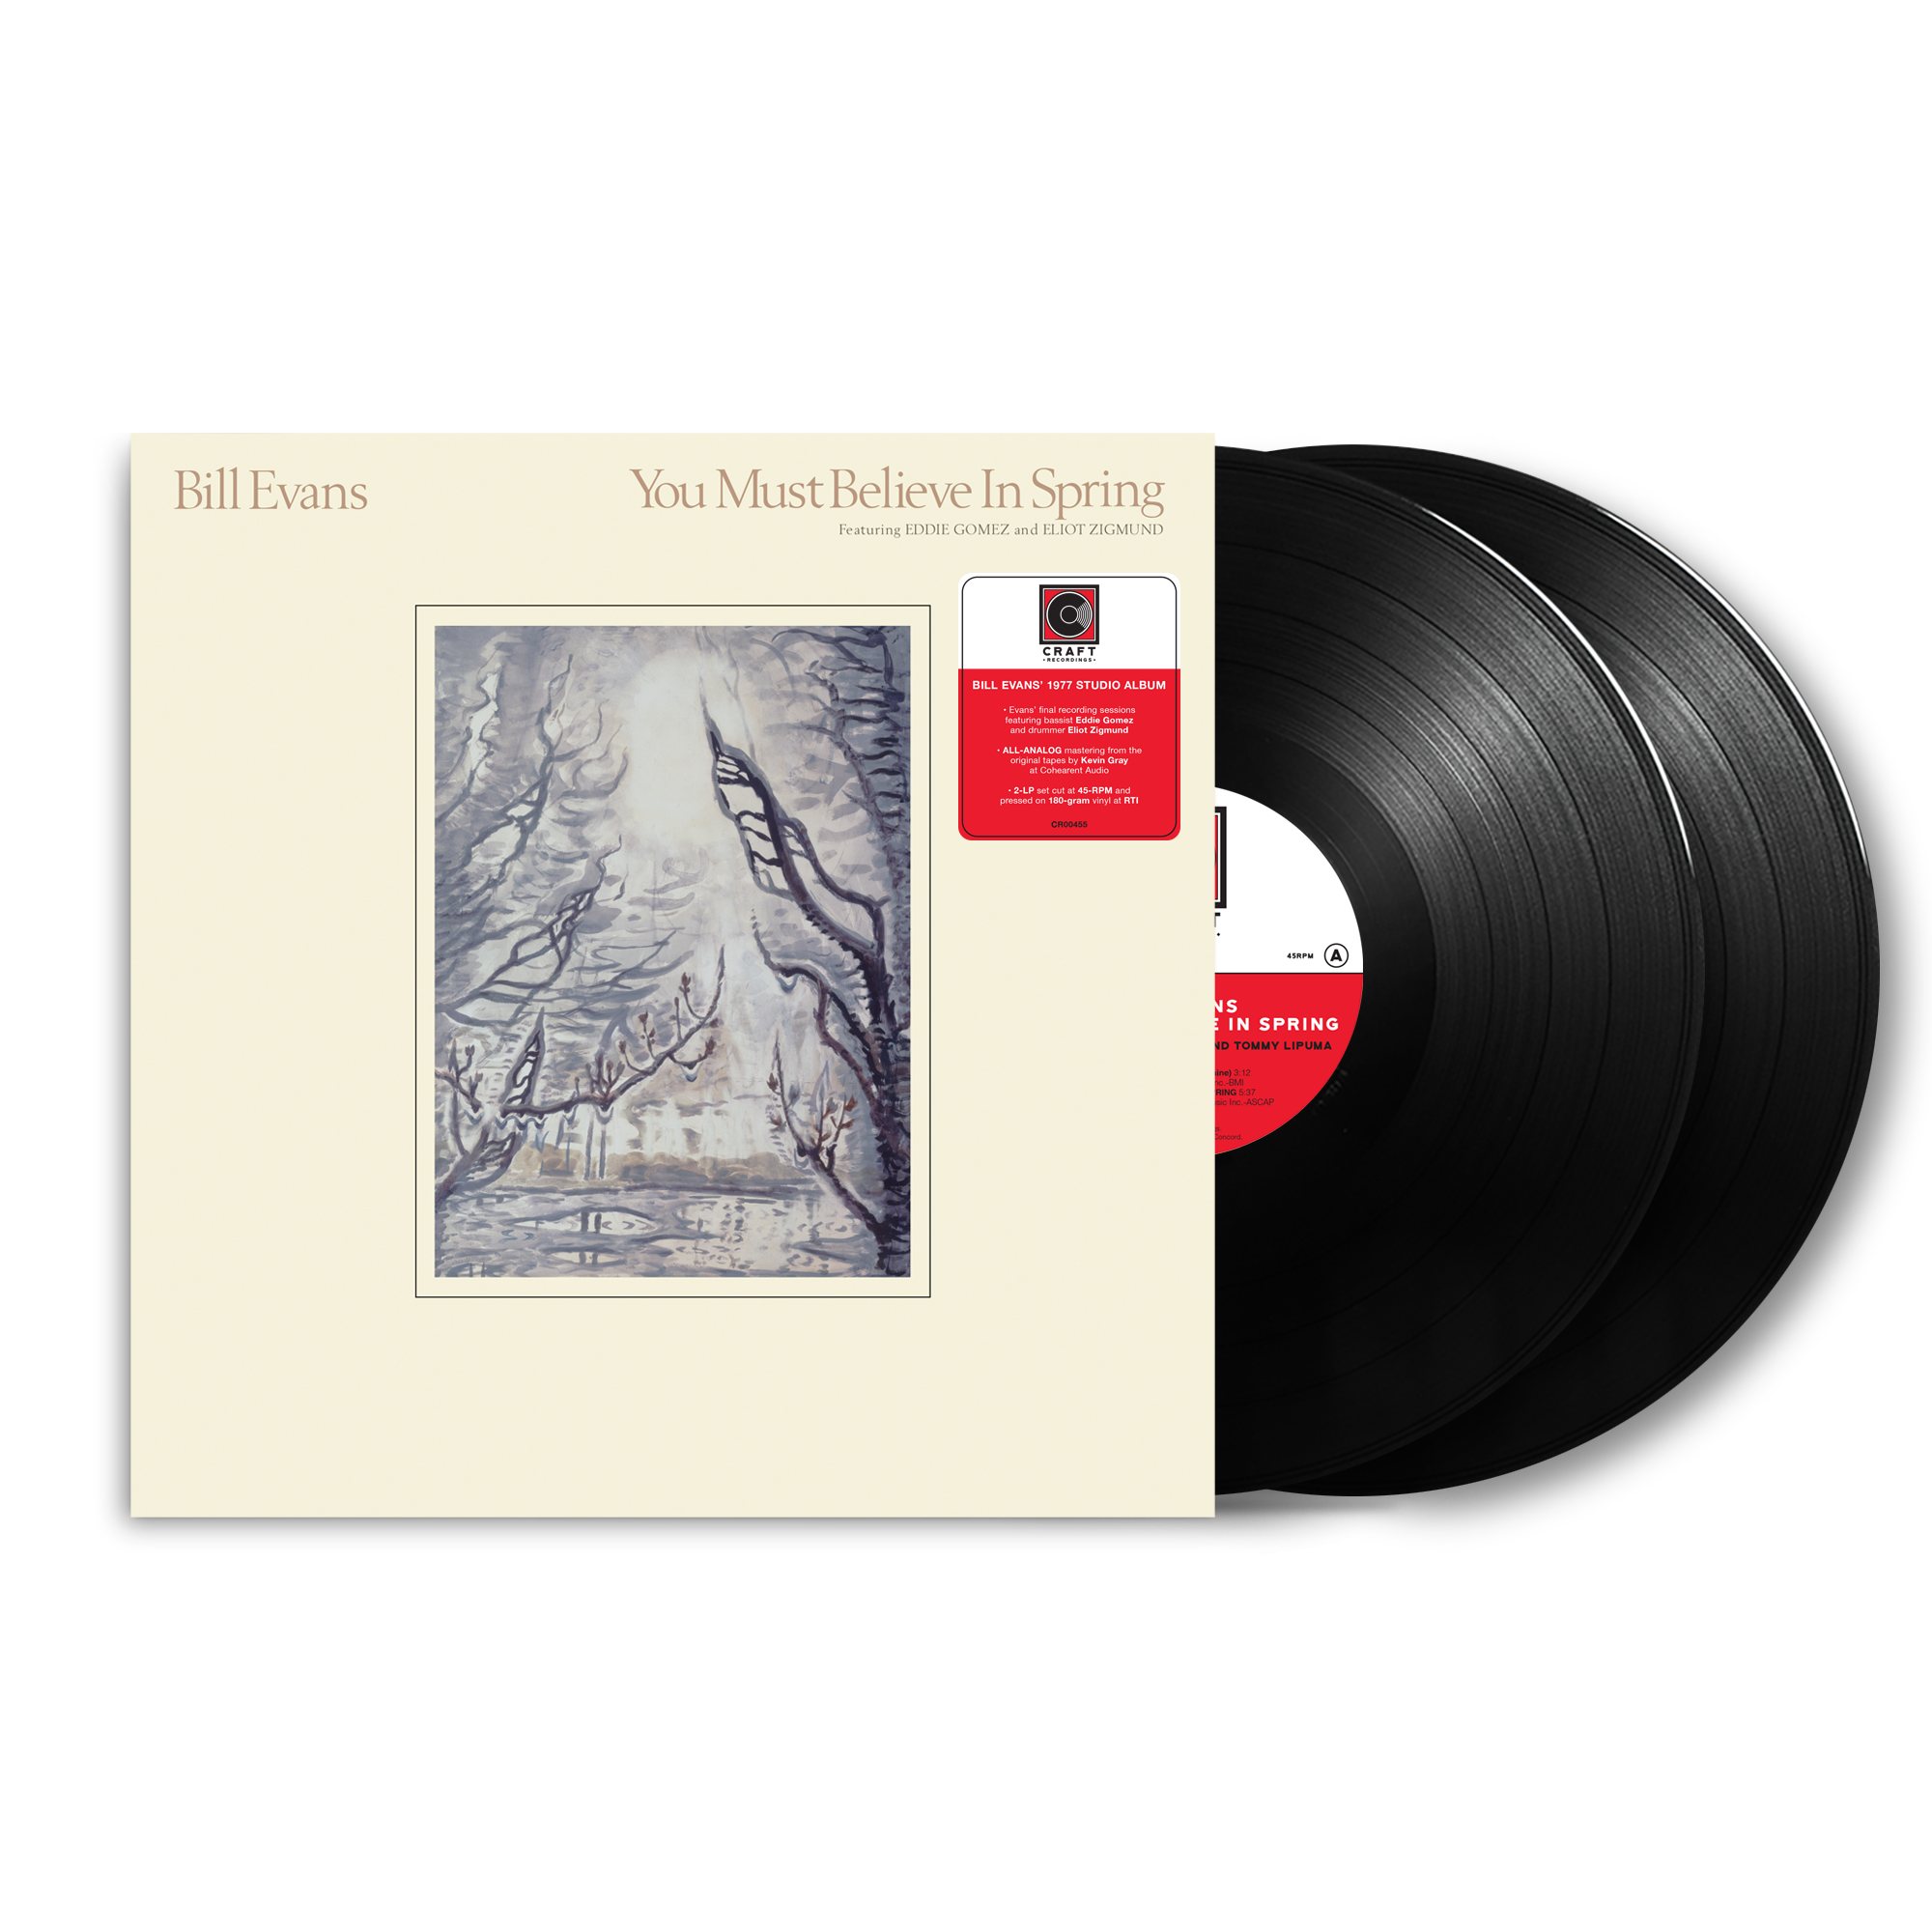 Featured image for “BILL EVANS’ POSTHUMOUS TOUR DE FORCE, YOU MUST BELIEVE IN SPRING, SET FOR REISSUE ON 180-GRAM VINYL, SACD, CD AND HI-RES DIGITAL ON JUNE 3”